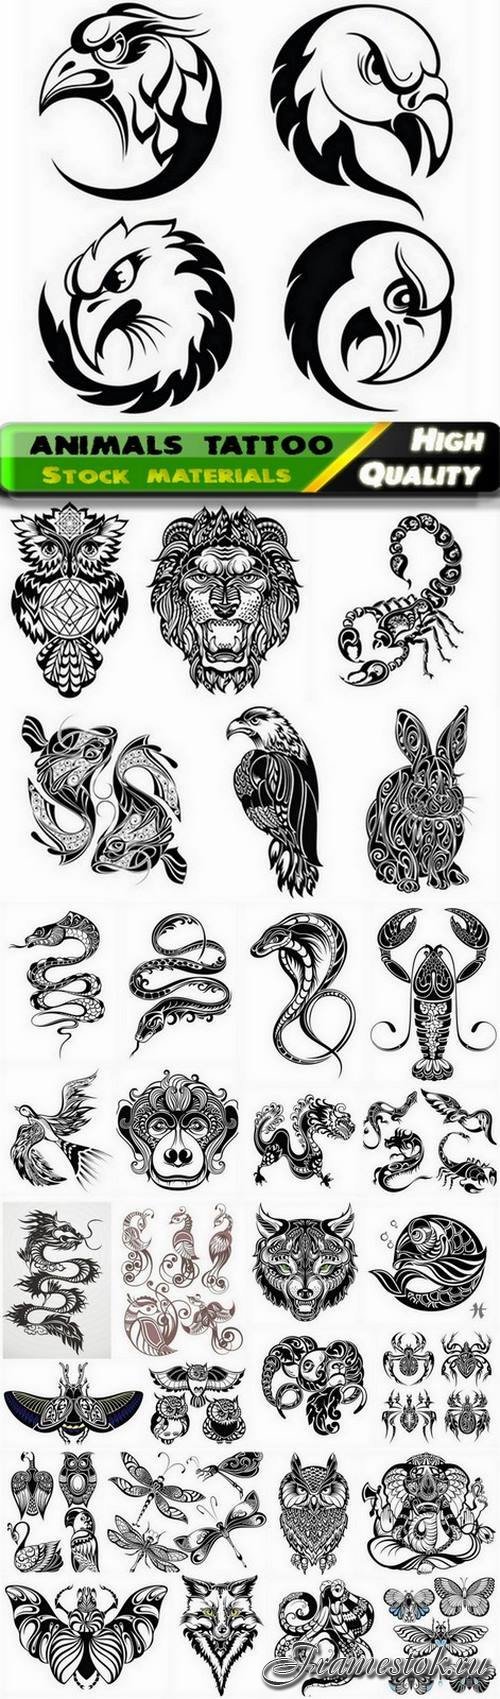 Abstract animals tattoos and elements - 31 Eps